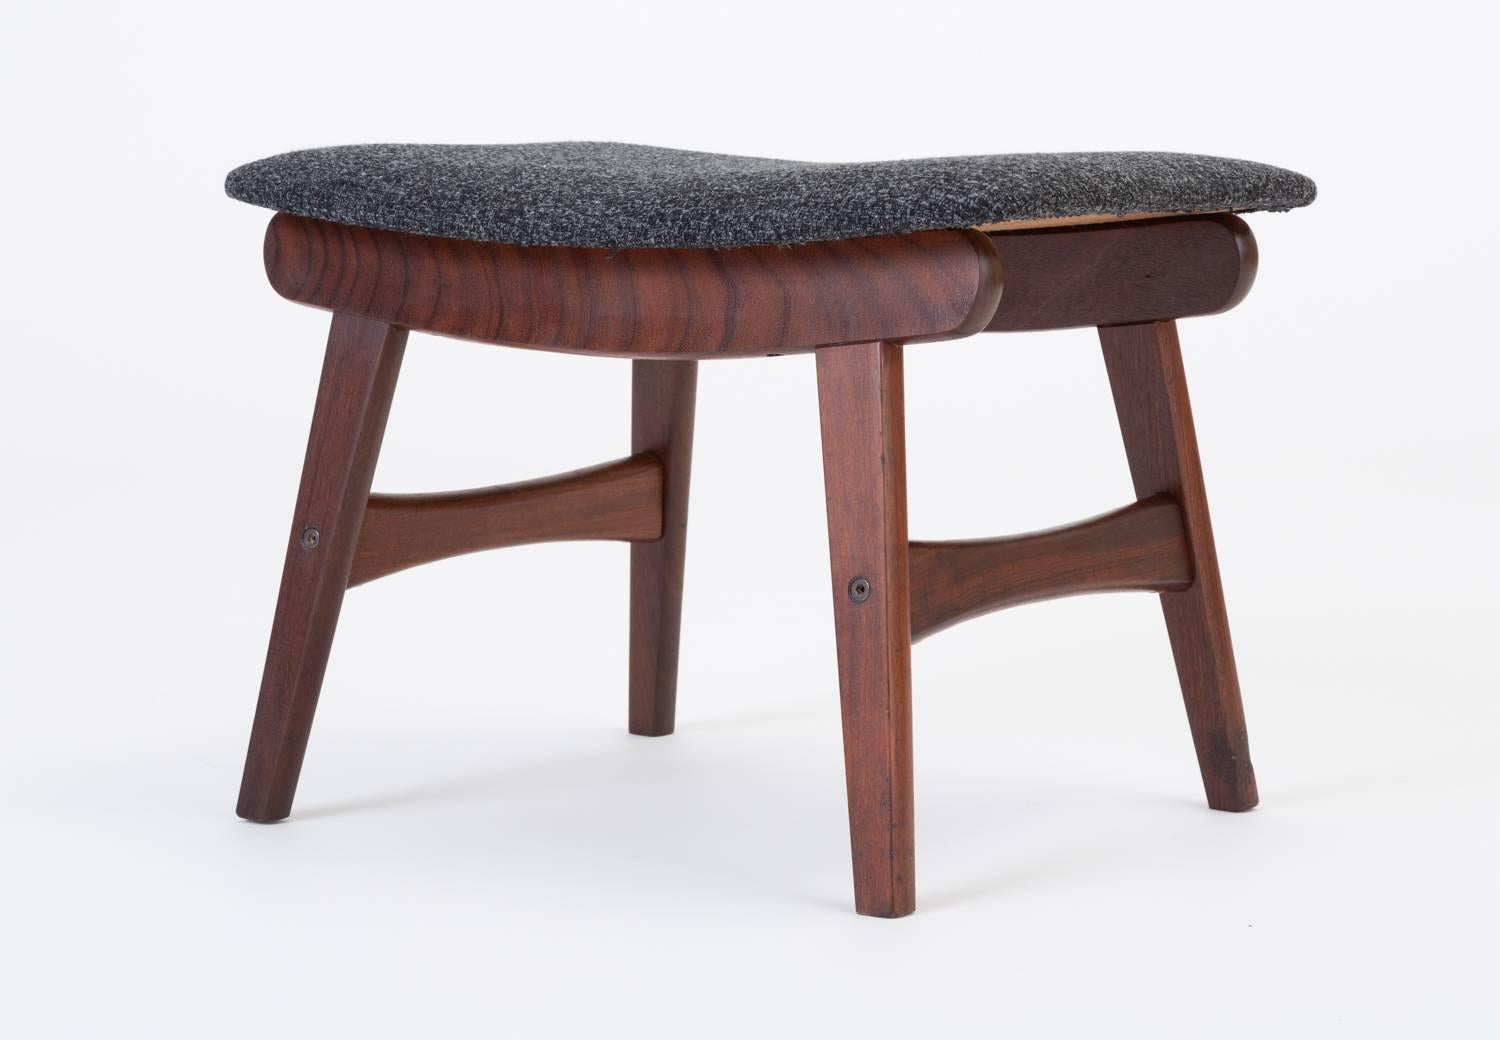 A modest Scandinavian ottoman or footrest has a base of teak wood with flat, angled legs and sculpted cross-supports. The curved cushion is upholstered in a heathered midnight blue textile that sits on slightly bowed teak runners. Unsigned.